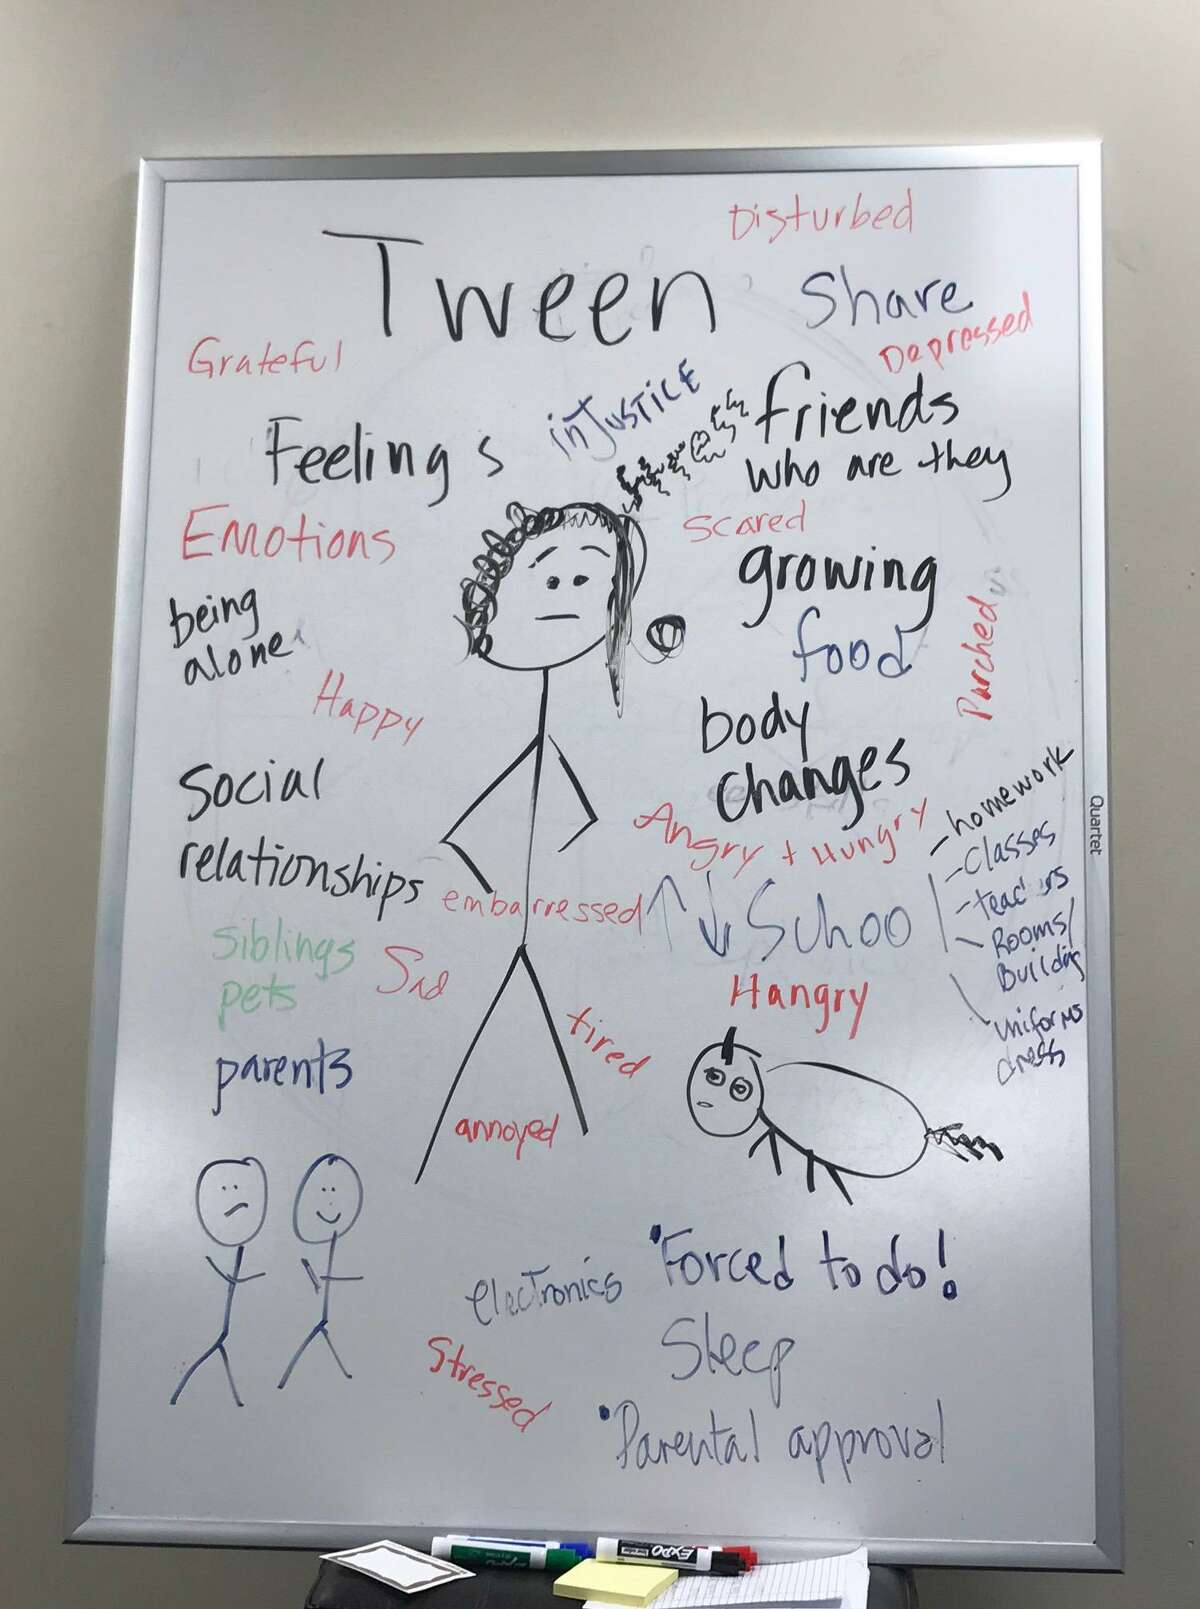 Some of the emotions, changes, and experiences that tweens go through